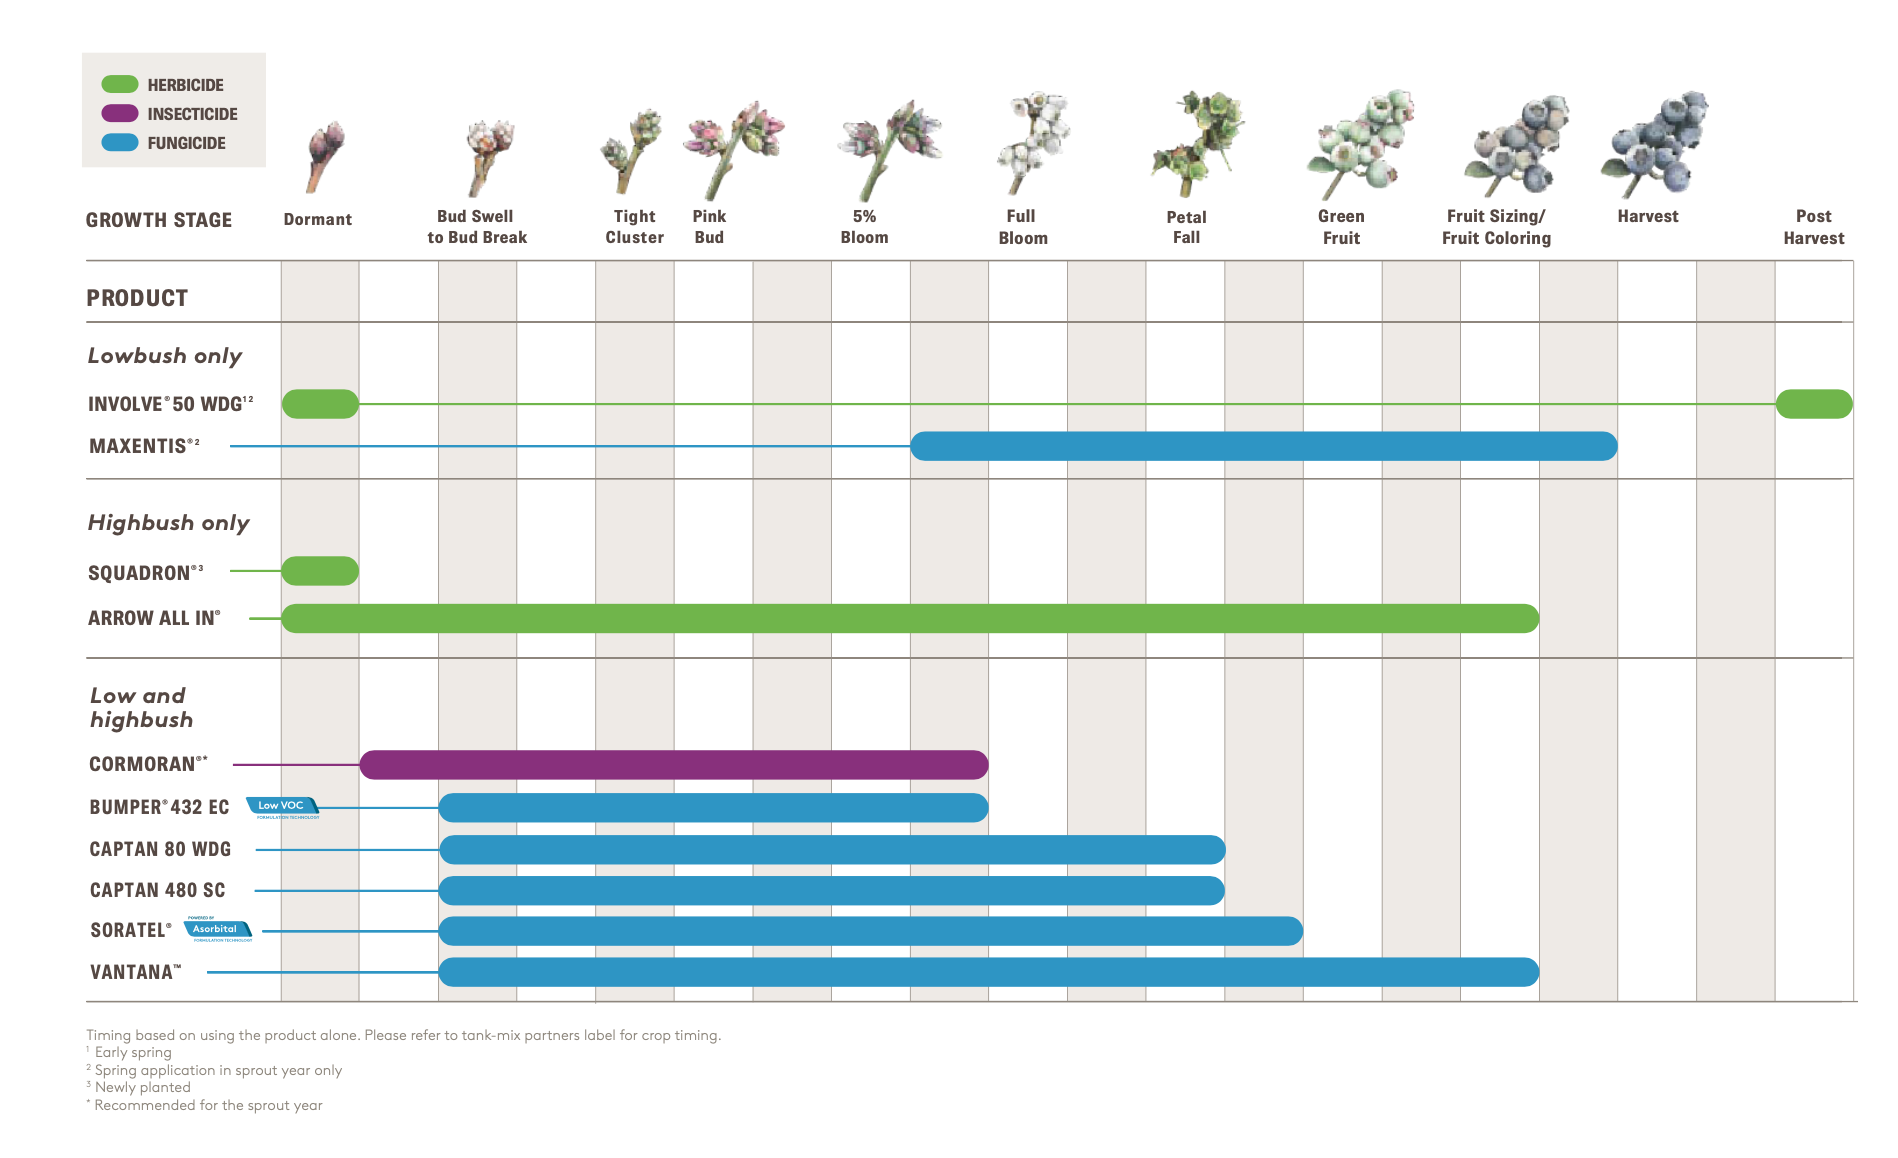 ADAMA all in on blueberries growth stages chart